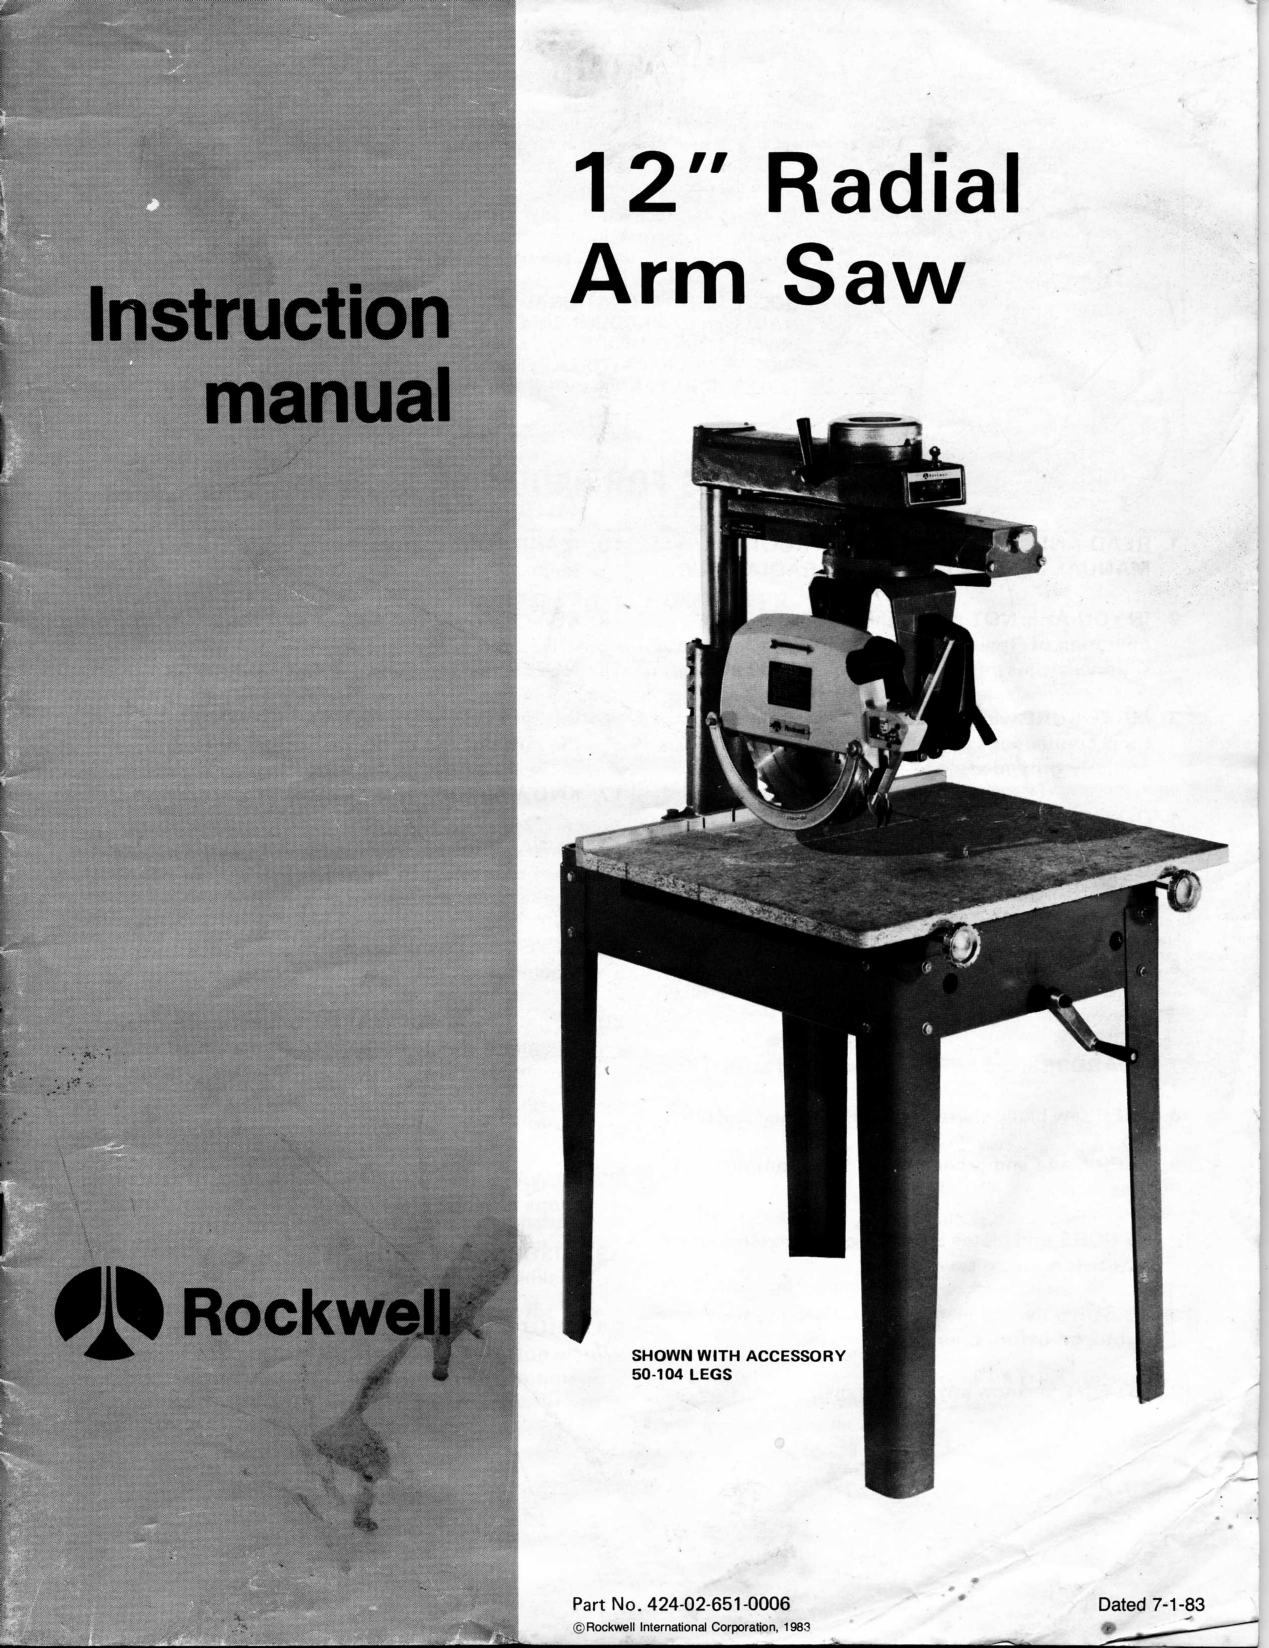 DELTA-Rockwell Super 900 9" Radial Arm Saw Instructions & Parts Manual 0235 